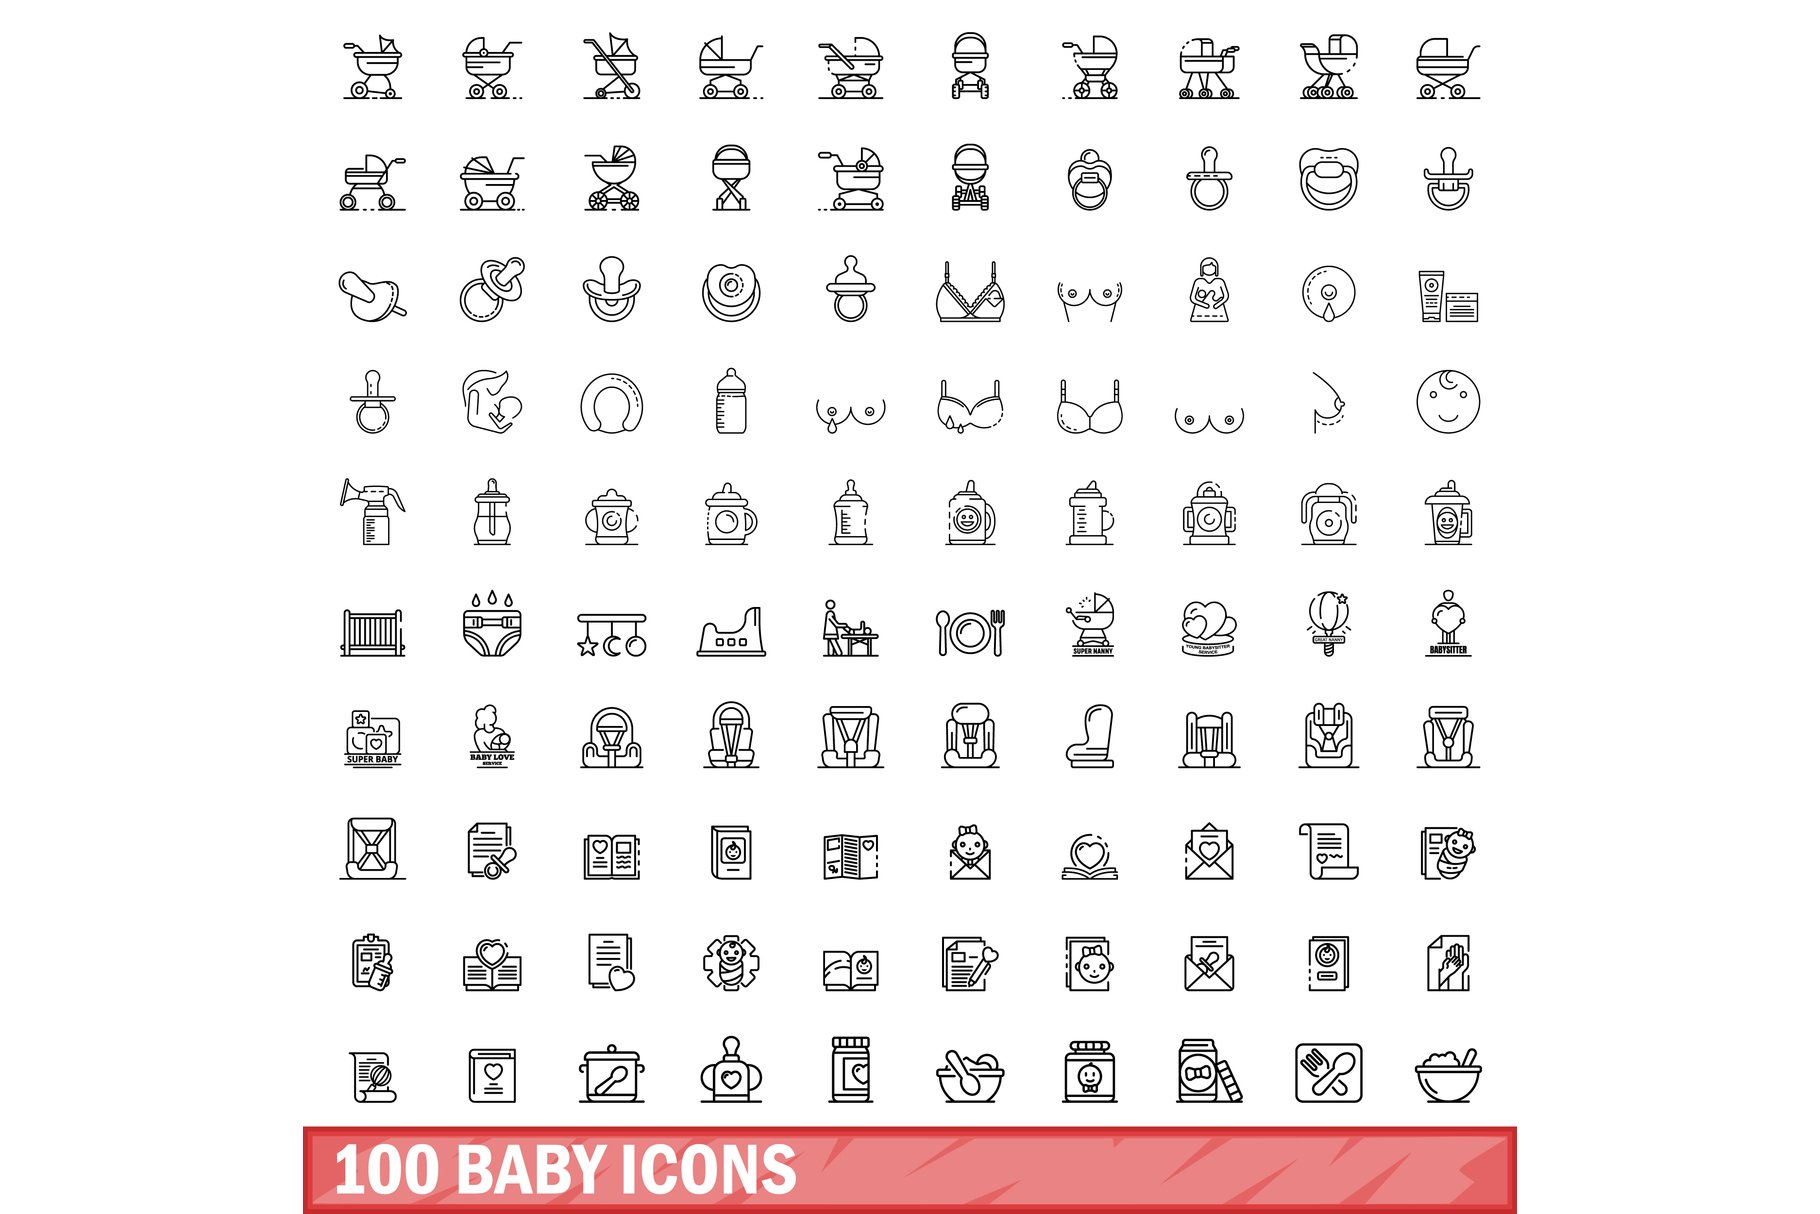 100 baby icons set, outline style cover image.